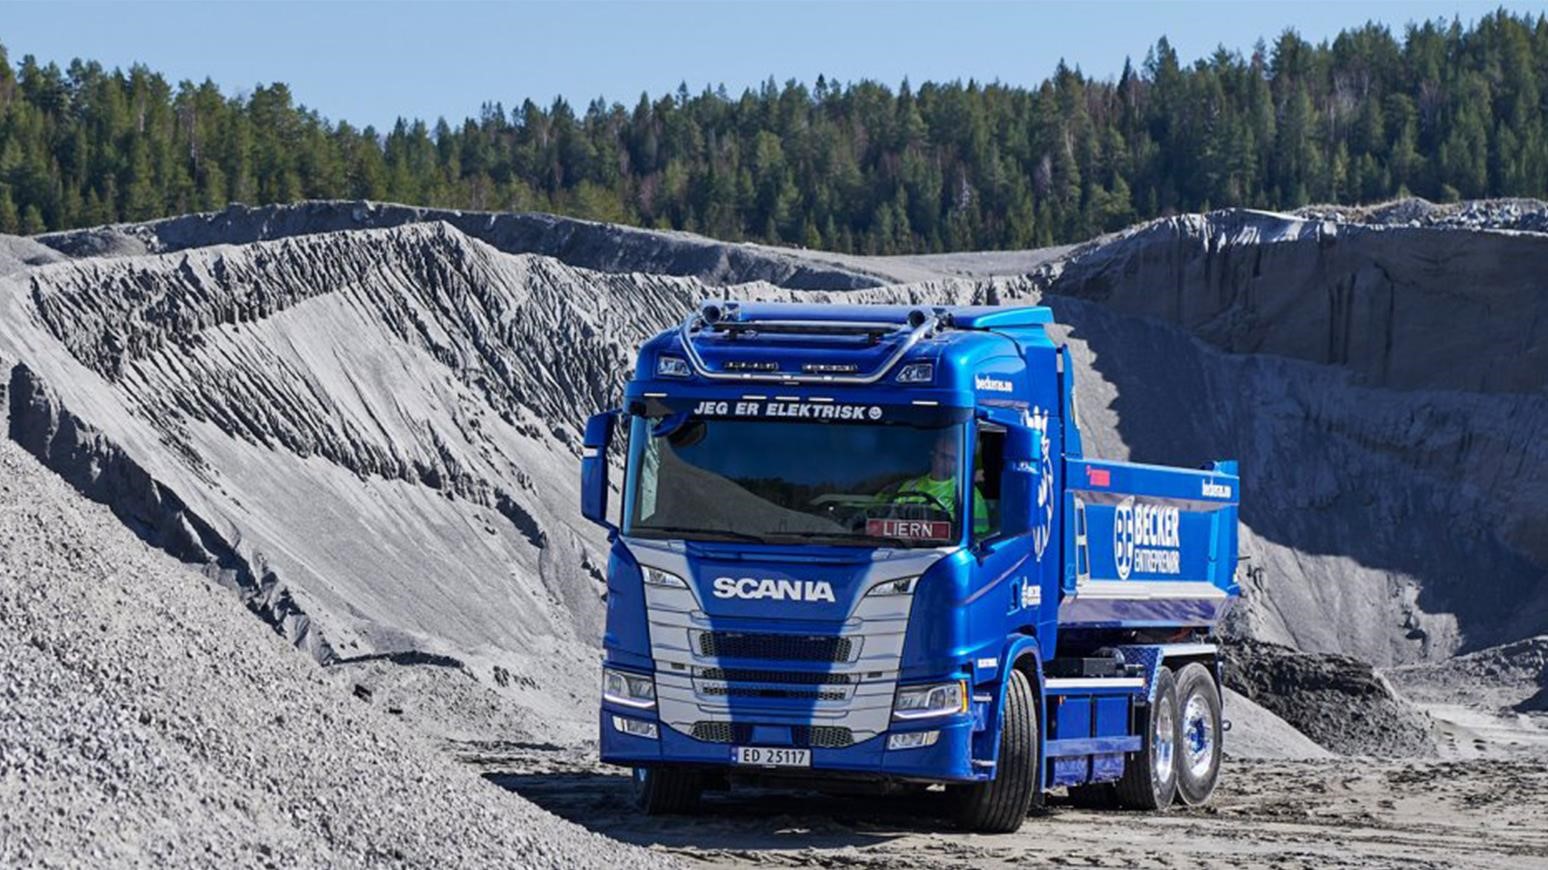 Becker Entreprenør AS Performs Work Across Oslo Construction Sites With Scania Electric Truck